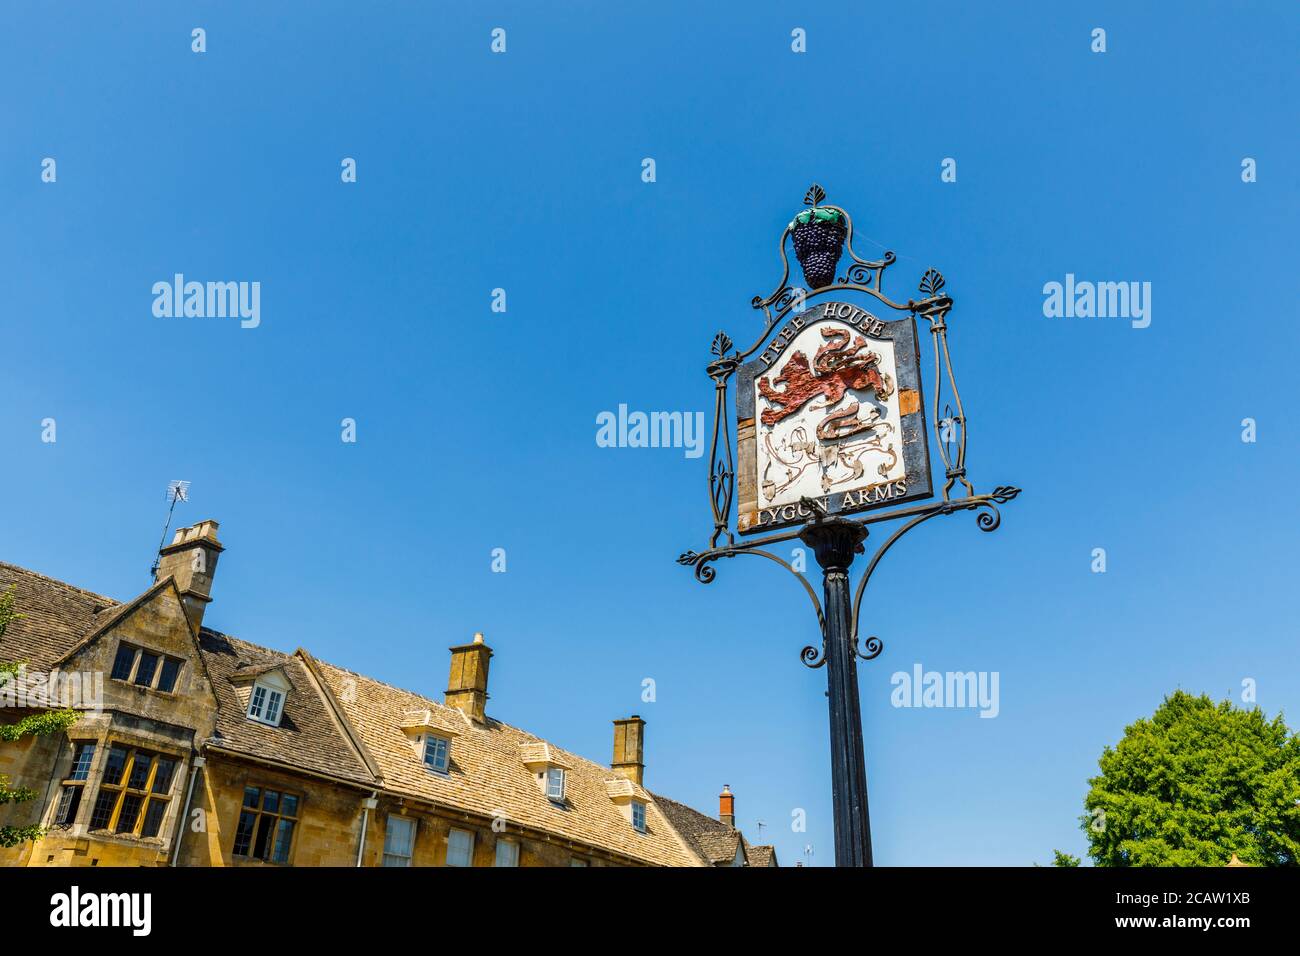 Dilapidated roadside name sign of the Lygon Arms in High Street, Chipping Campden, a small market town in the Cotswolds in Gloucestershire Stock Photo